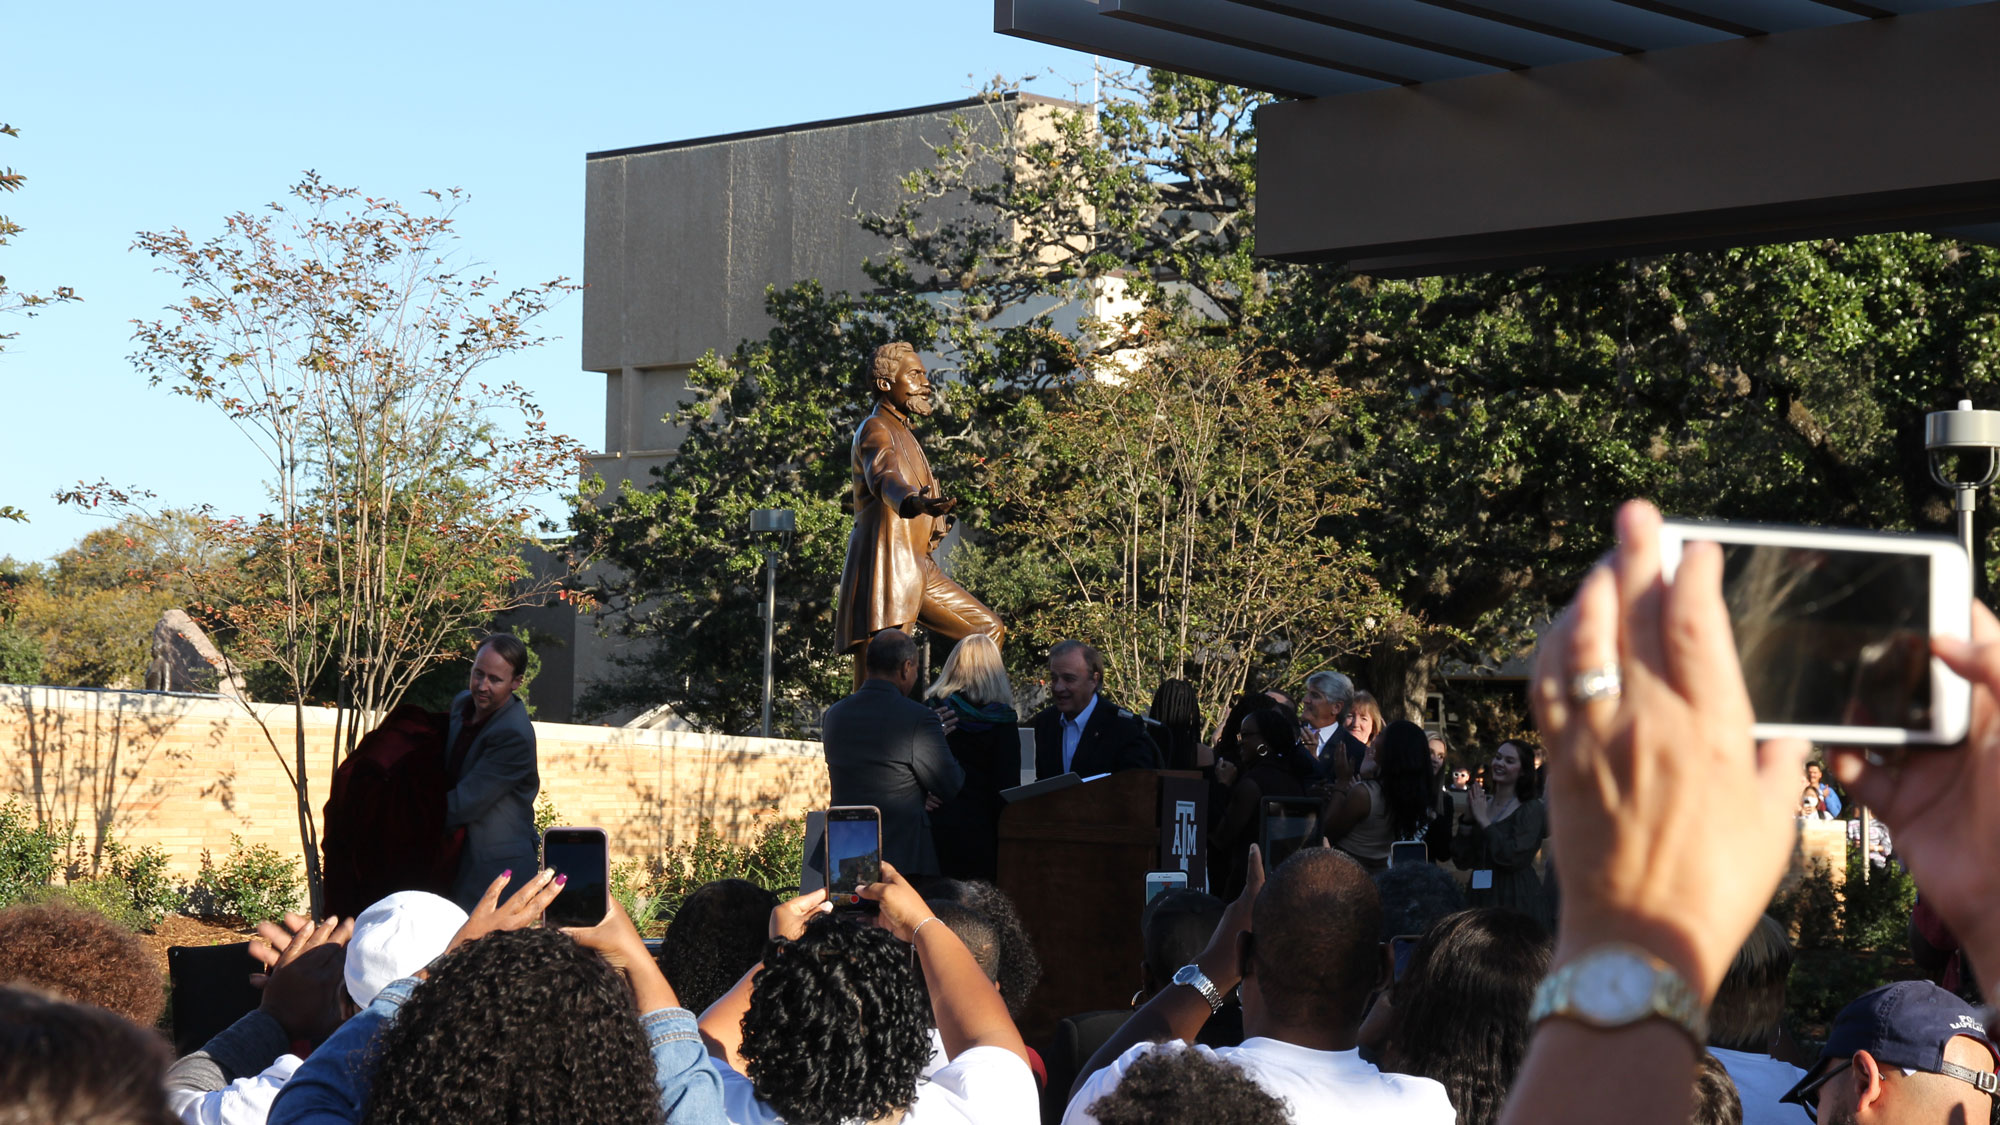 A crowd gathers around the unveiling of the new statue of Sen. Matthew Gaines, located near the Memorial Student Center and Student Services Building in the middle of Texas A&amp;M's campus.